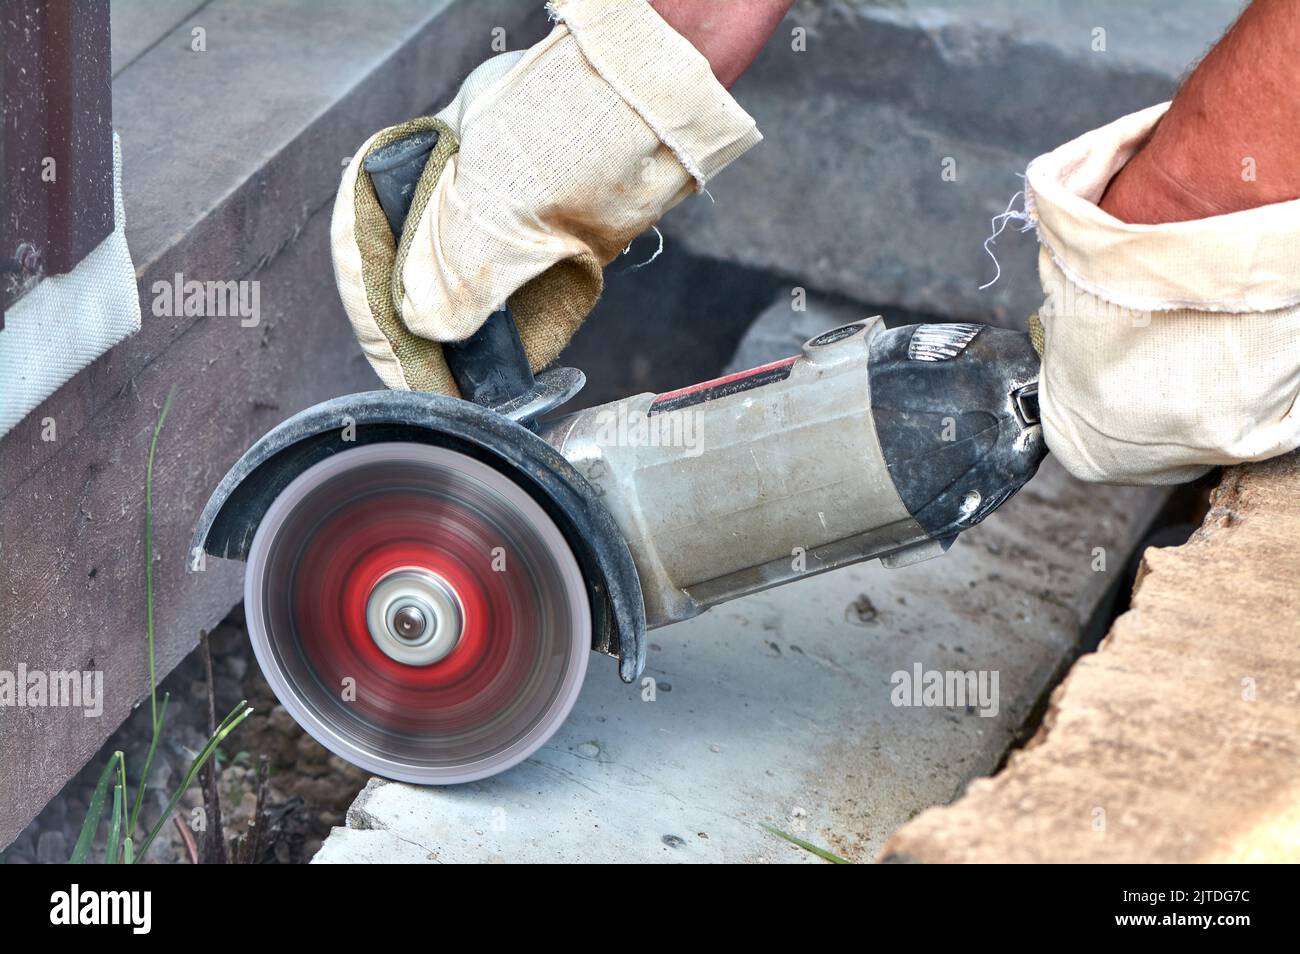 A worker with a circular saw cuts a concrete block in close-up. Stock Photo